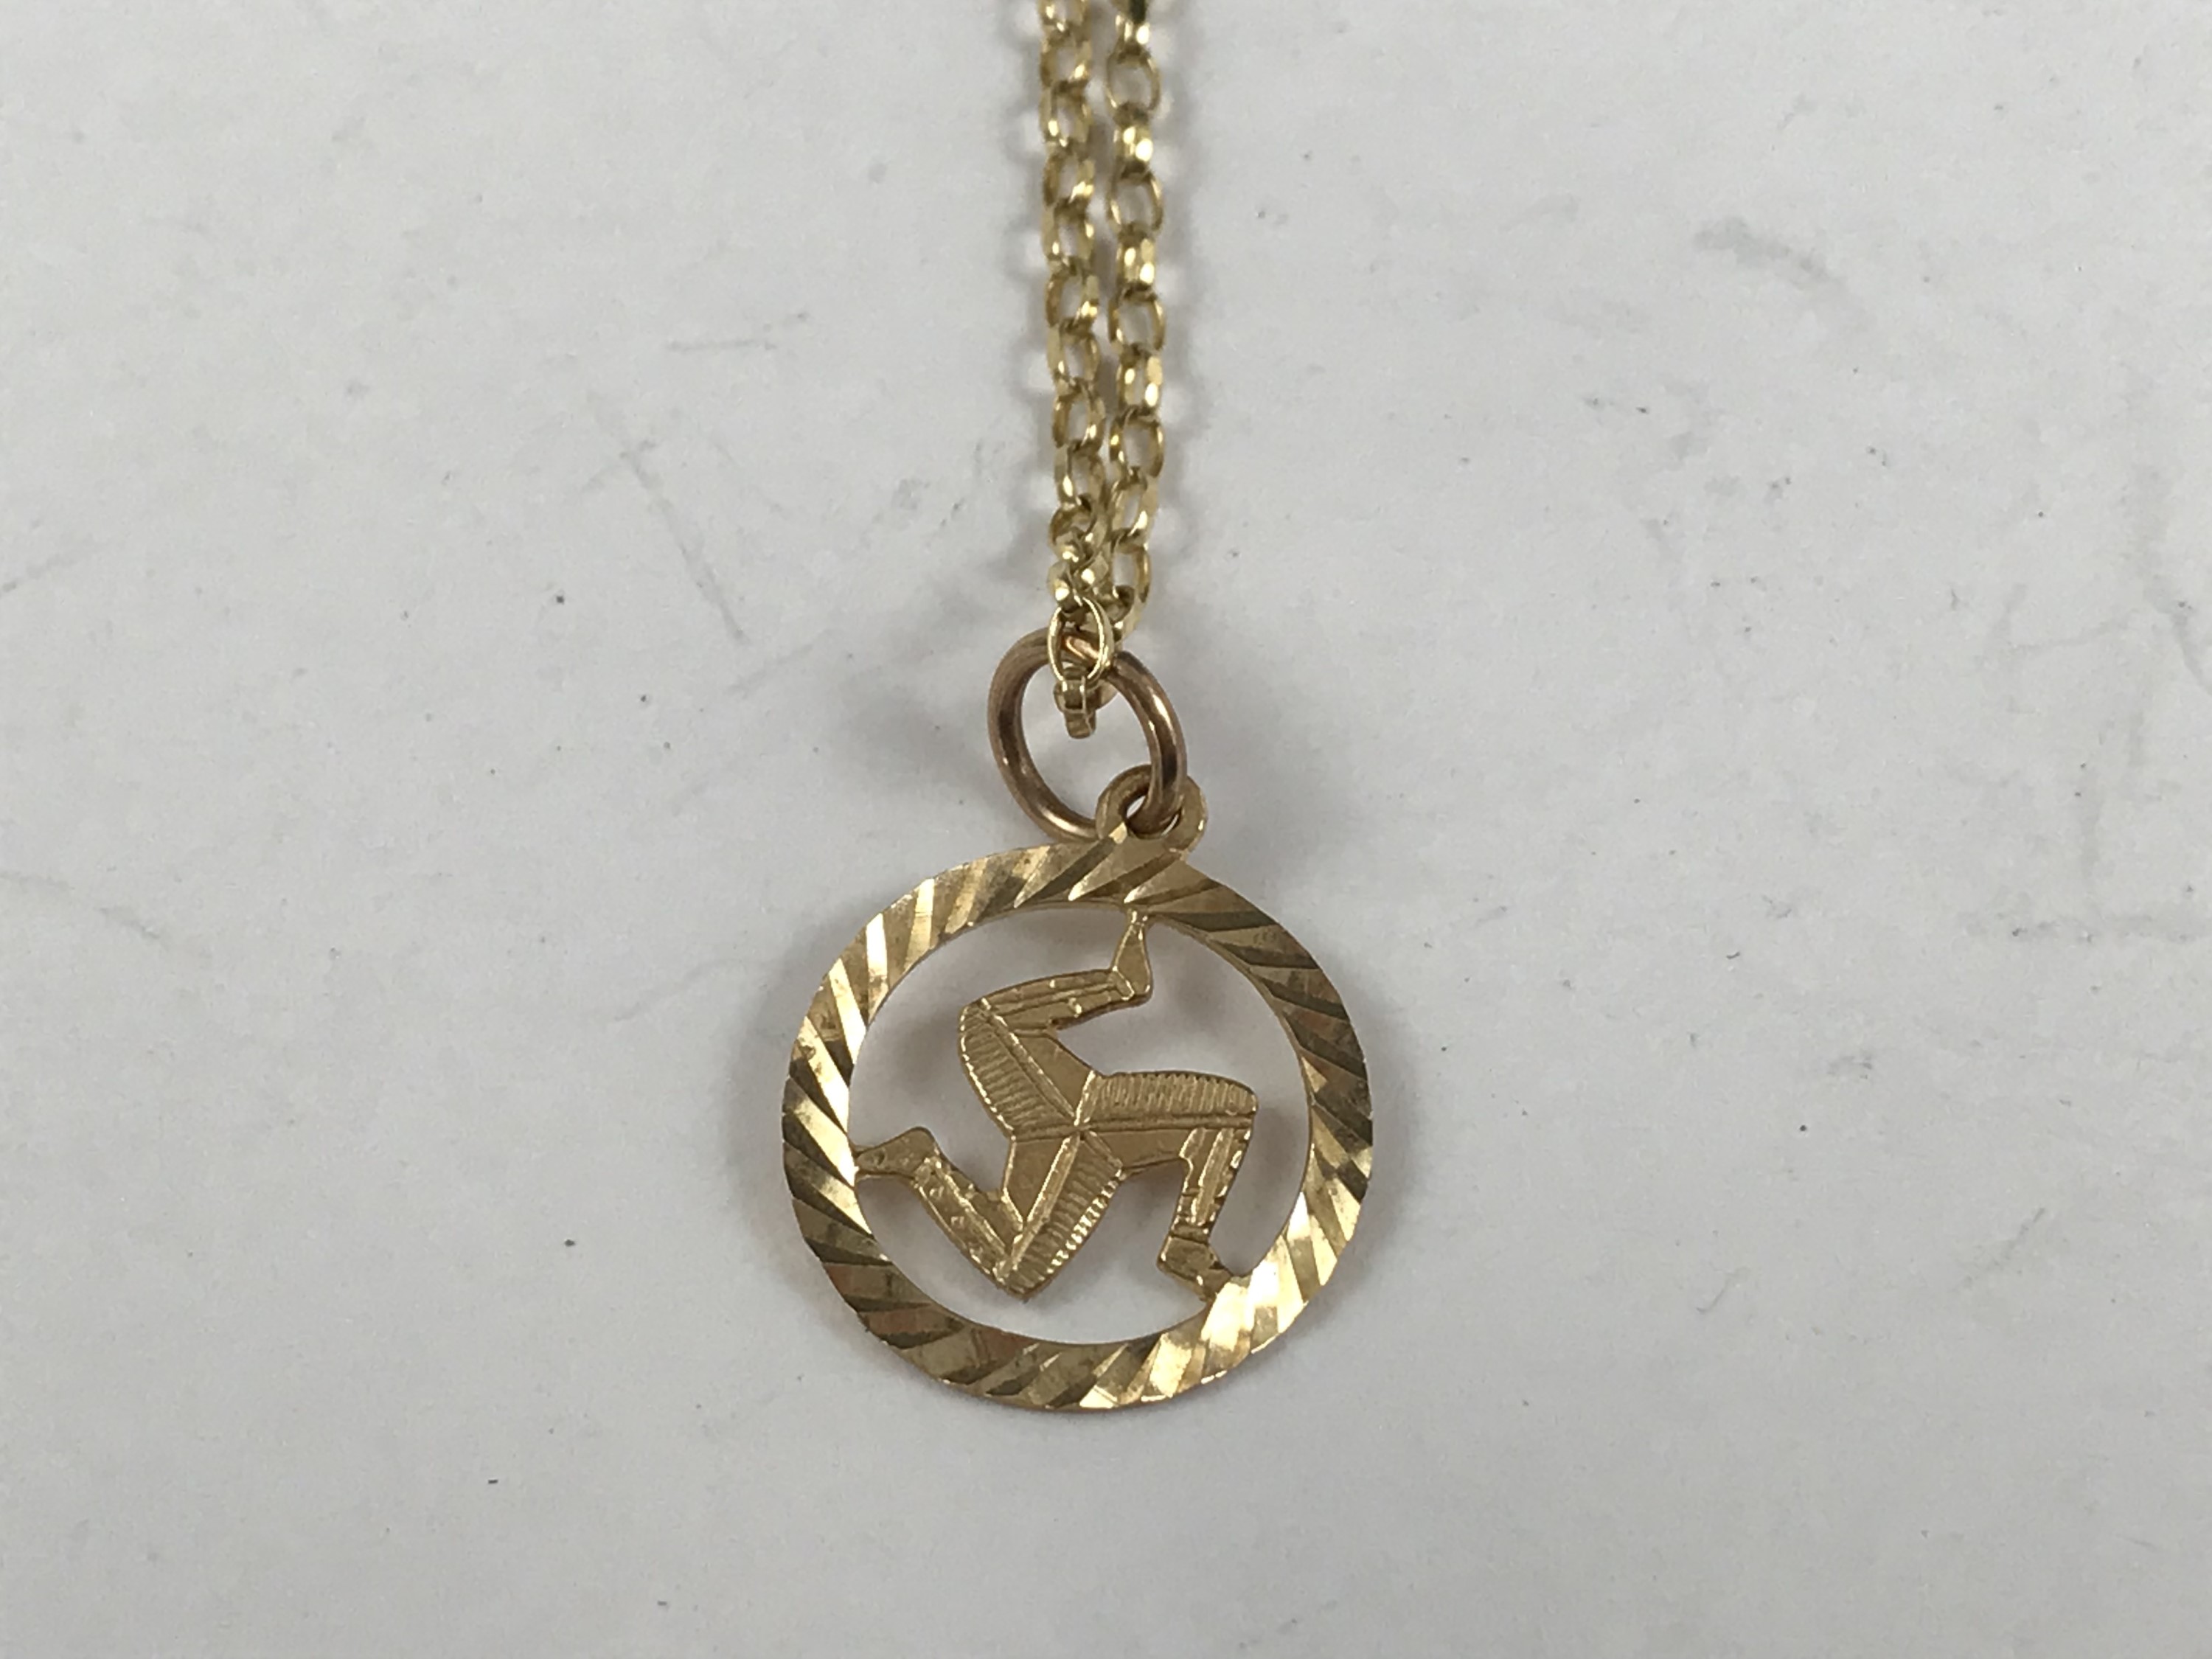 A yellow-metal Isle of Man pendant on a 9ct gold neck chain, 2.7g